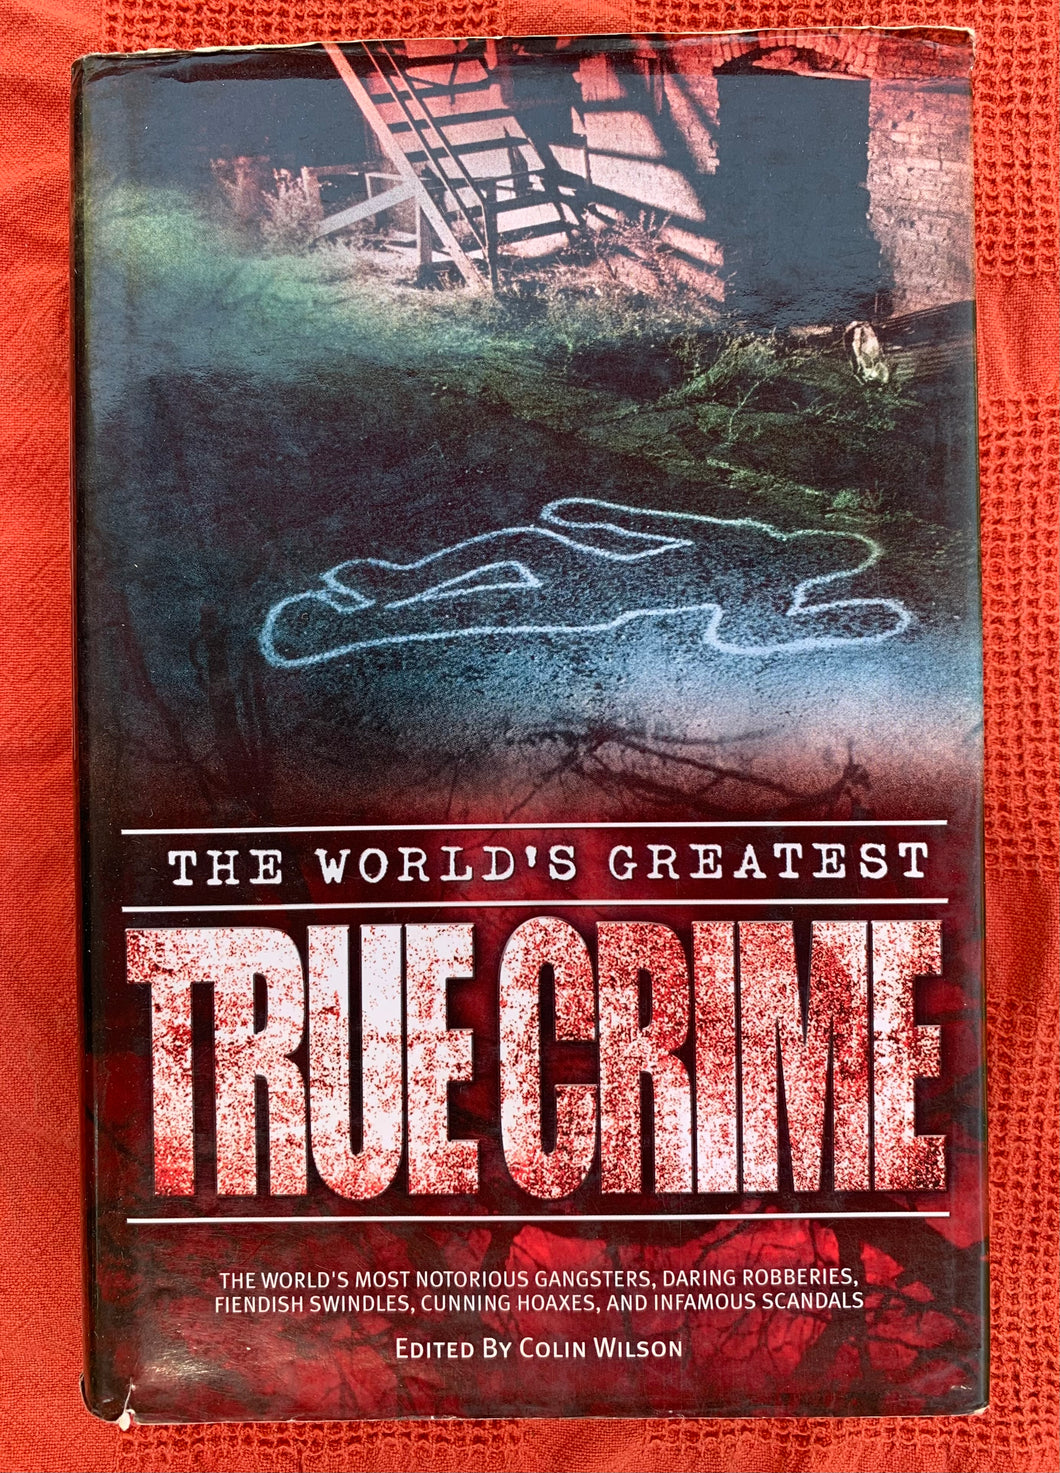 The World's Greatest True Crime: The World's Most Notorious Gangsters, Daring Robberies, Fiendish Swindles, Cunning Hoaxes, and Infamous Scandals